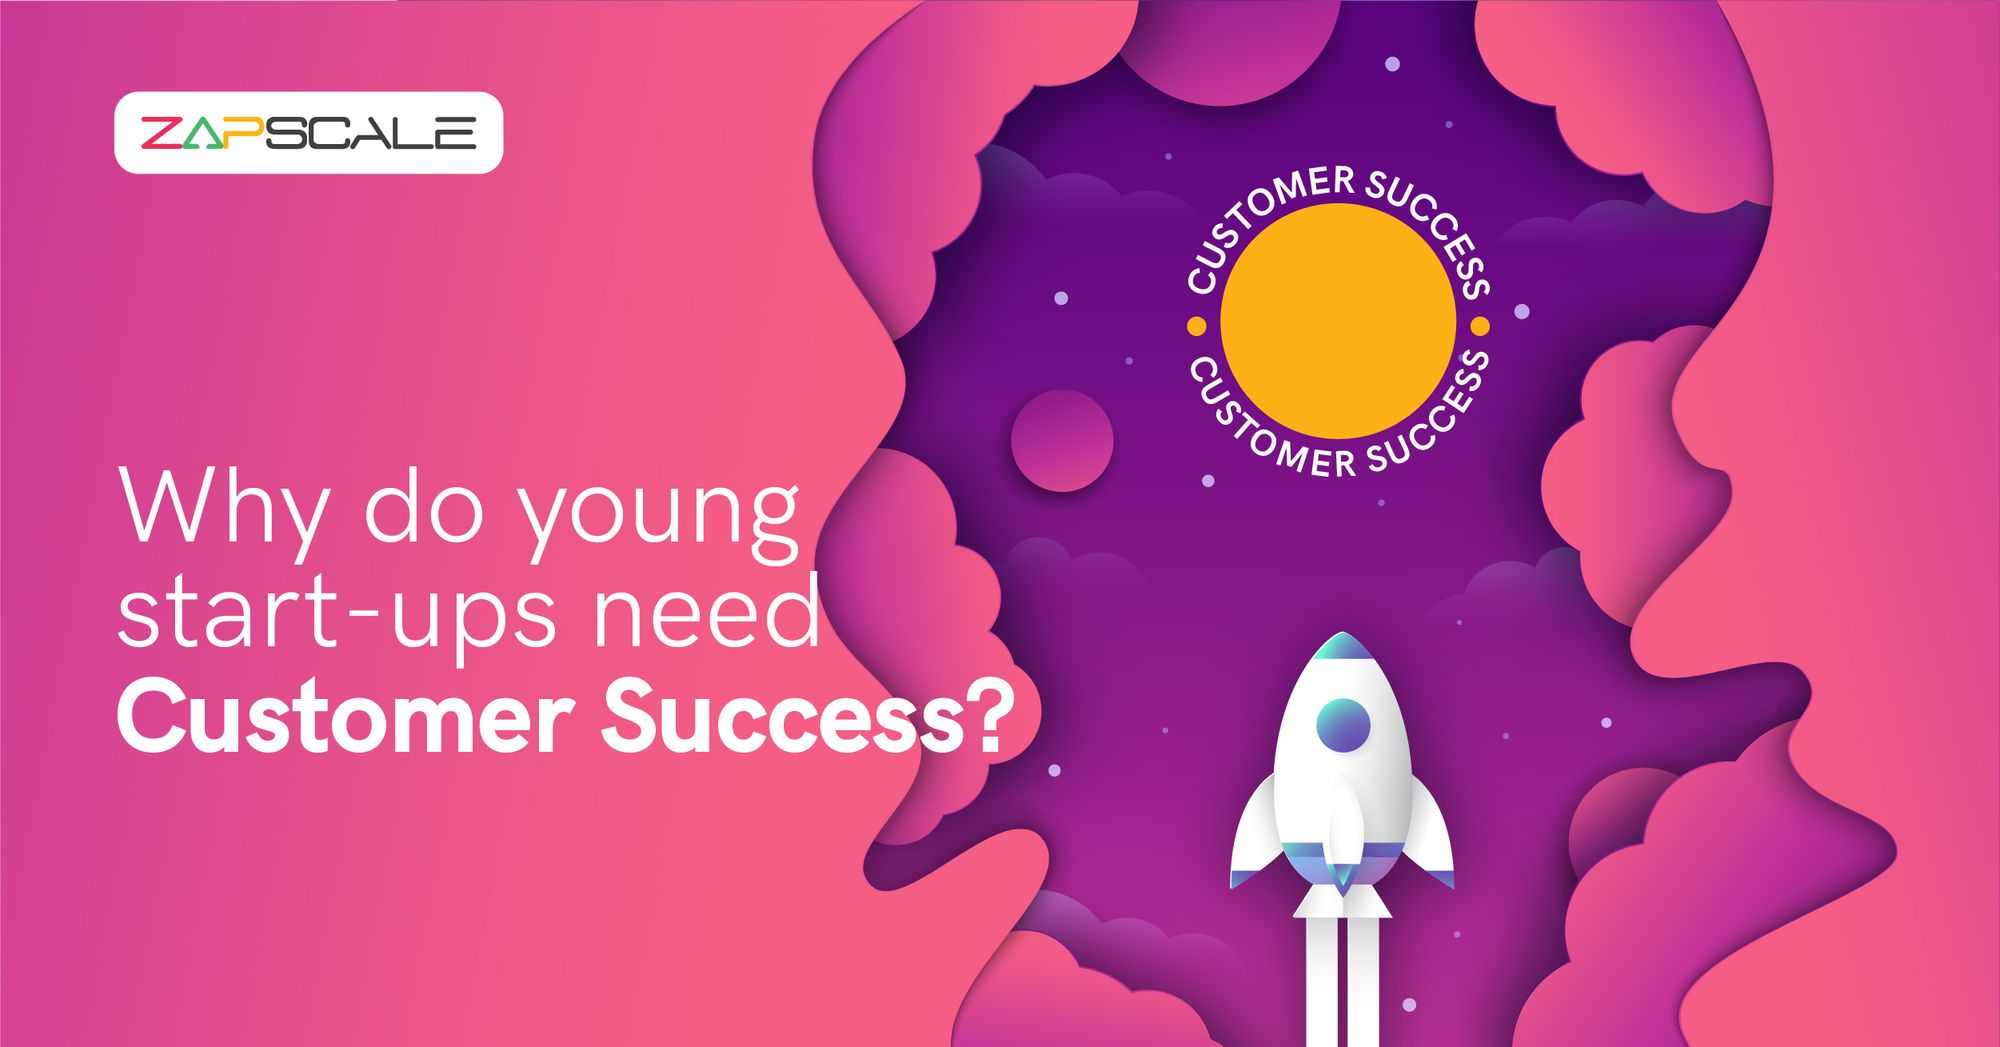 Why do young startups need Customer Success?